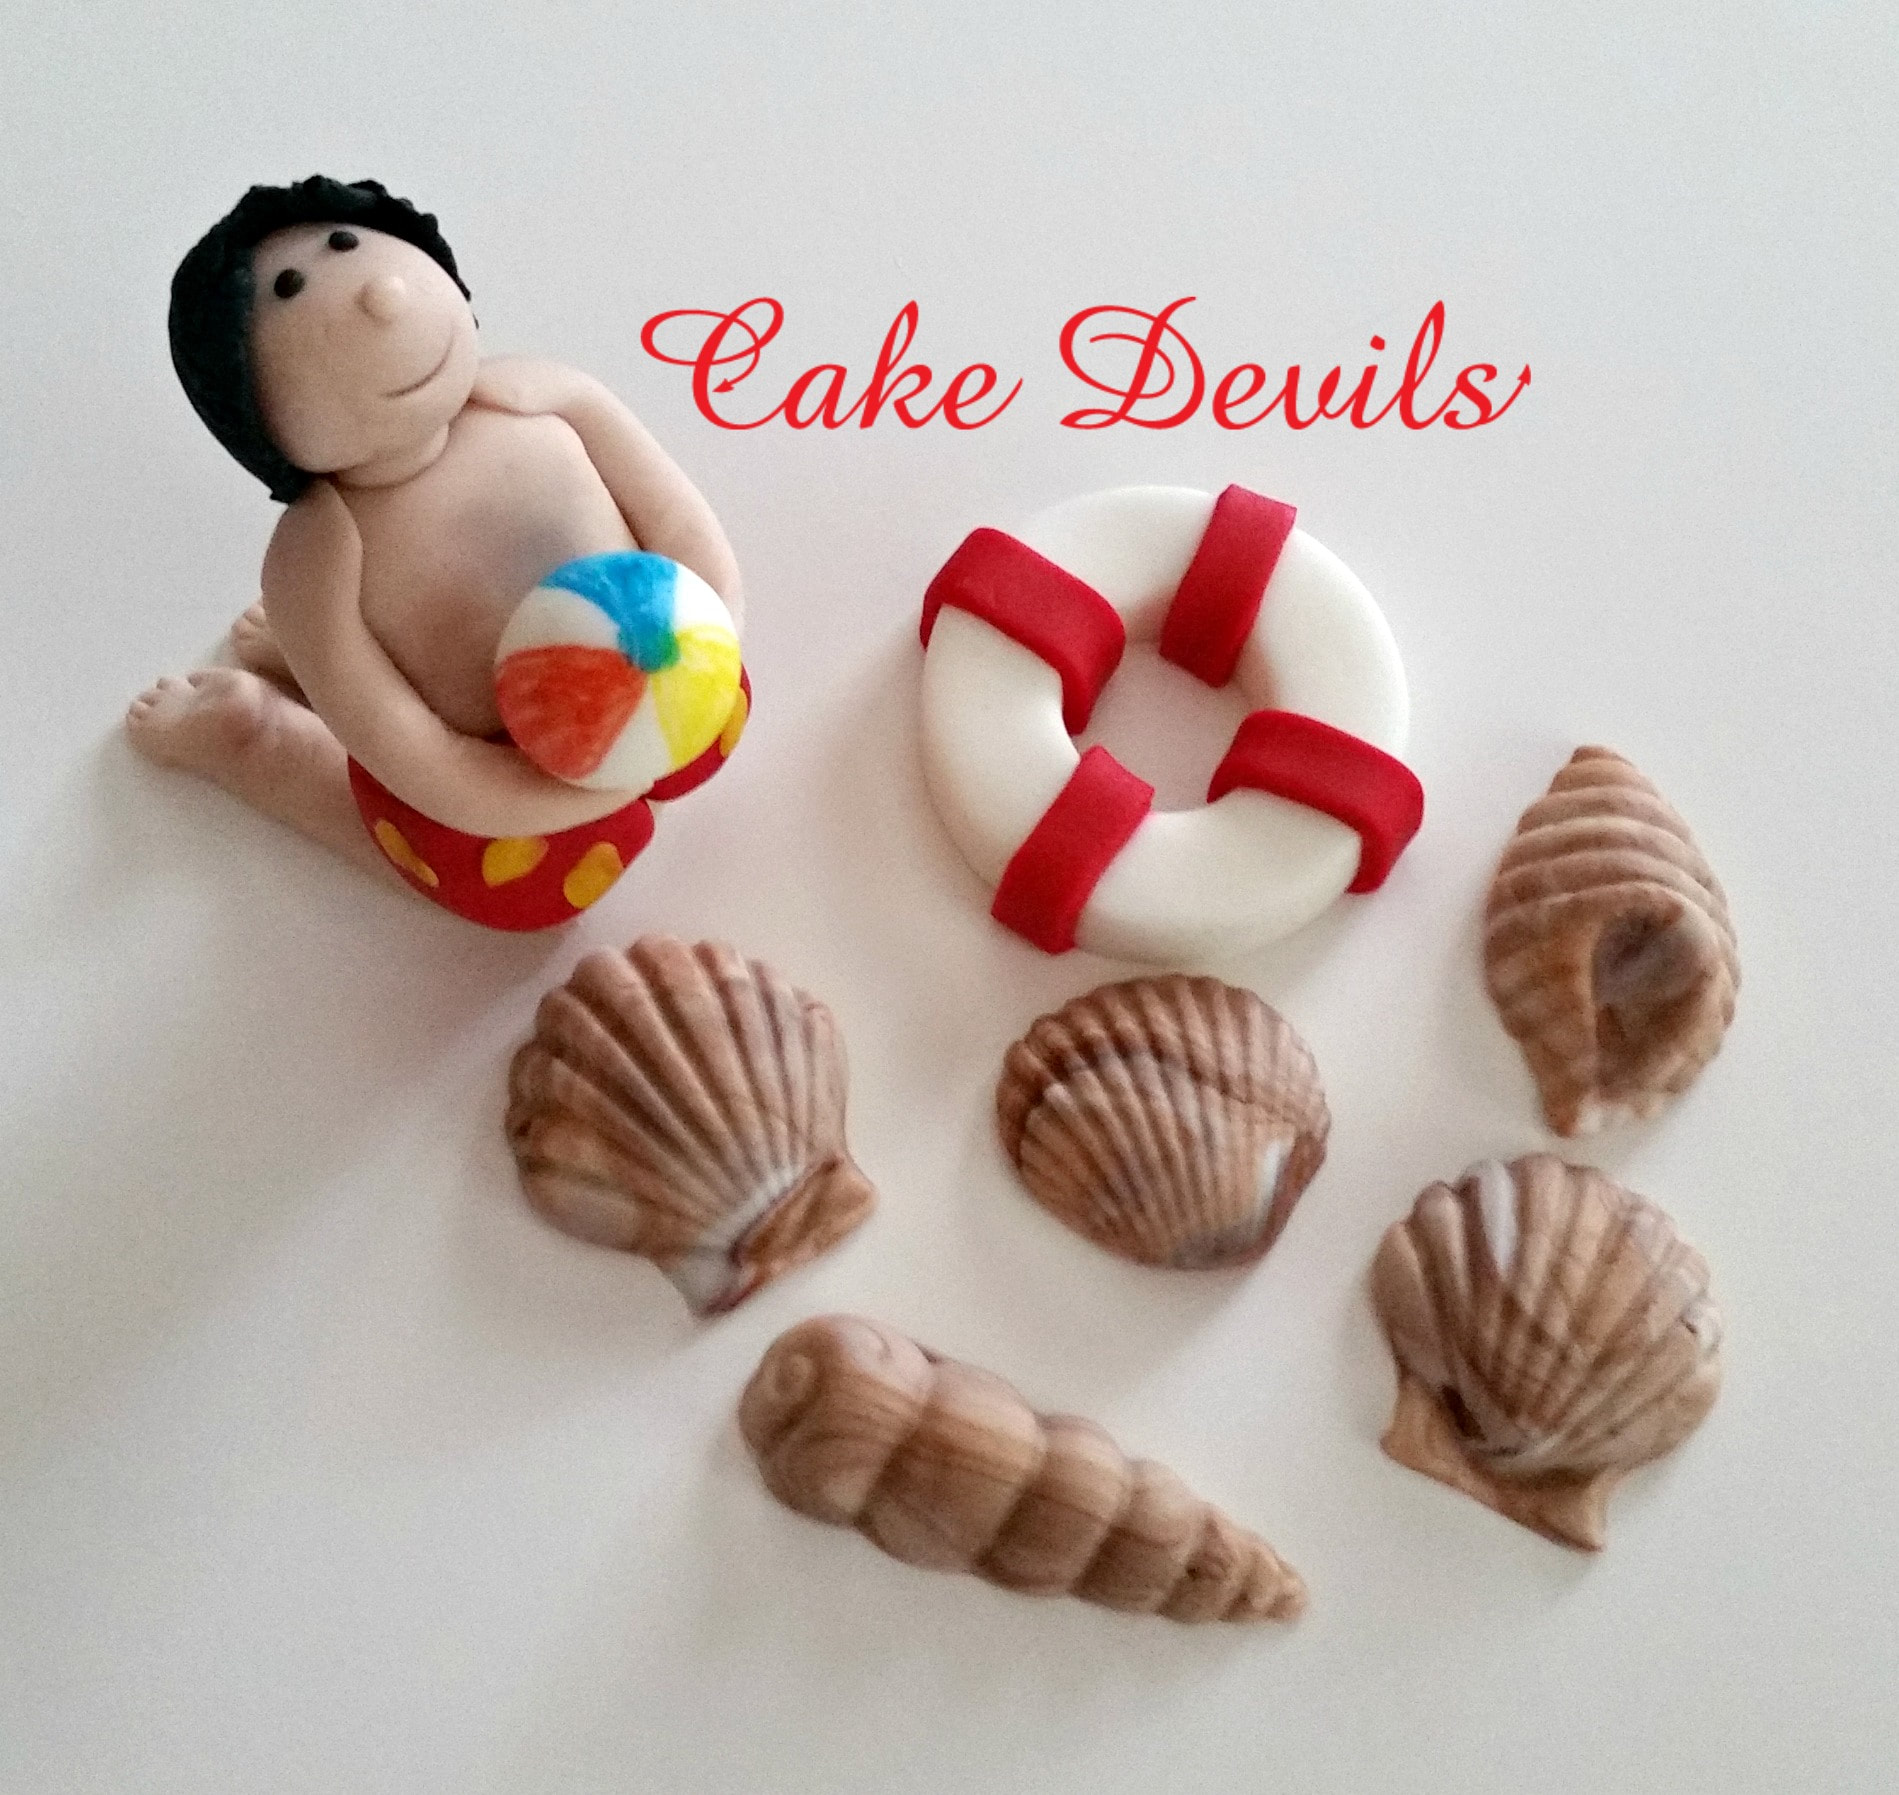 Beach Party Cake Topper Kit - Fondant, Handmade Edible, Pool party, Beach  ball cake toppers, shells, cake decorations, swimming party